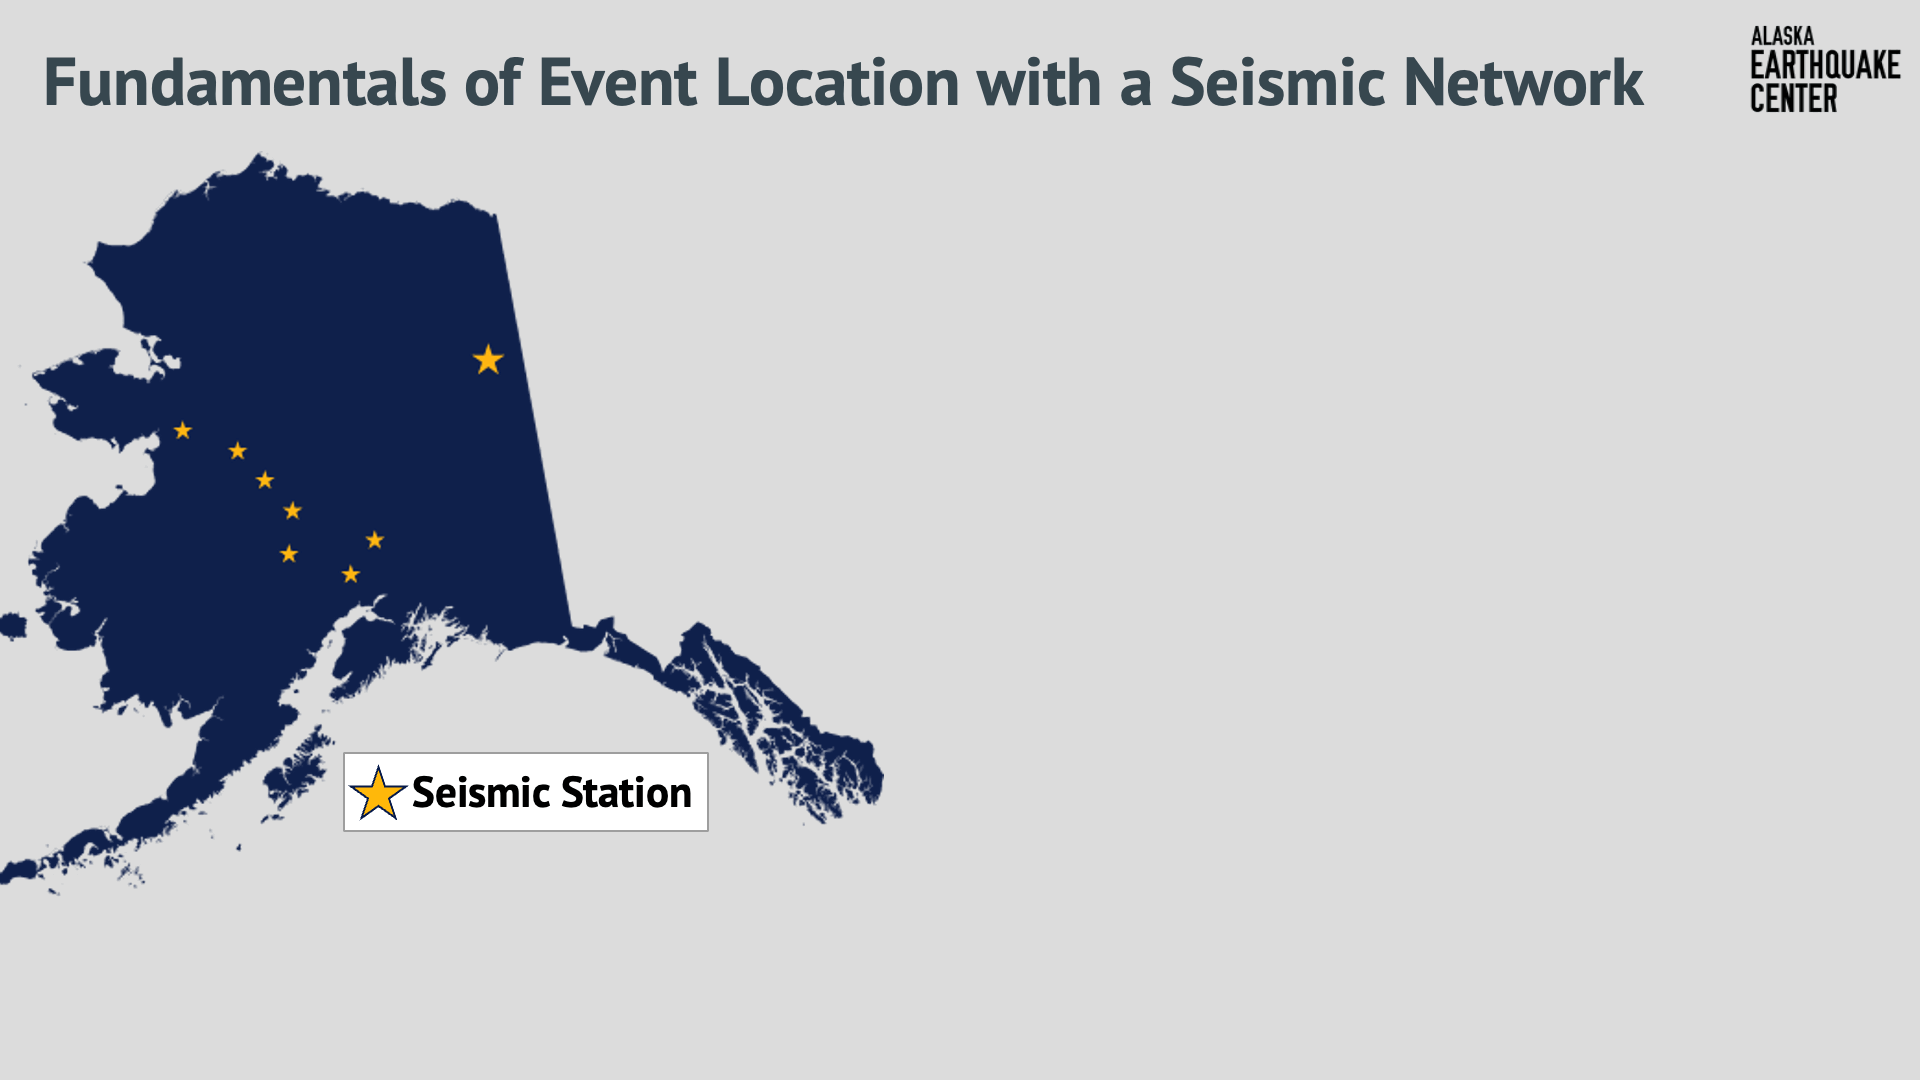 GIF showing seismic stations recording arrival times of seismic waves, then P and S wave arrivals are selected on each station's seismogram.